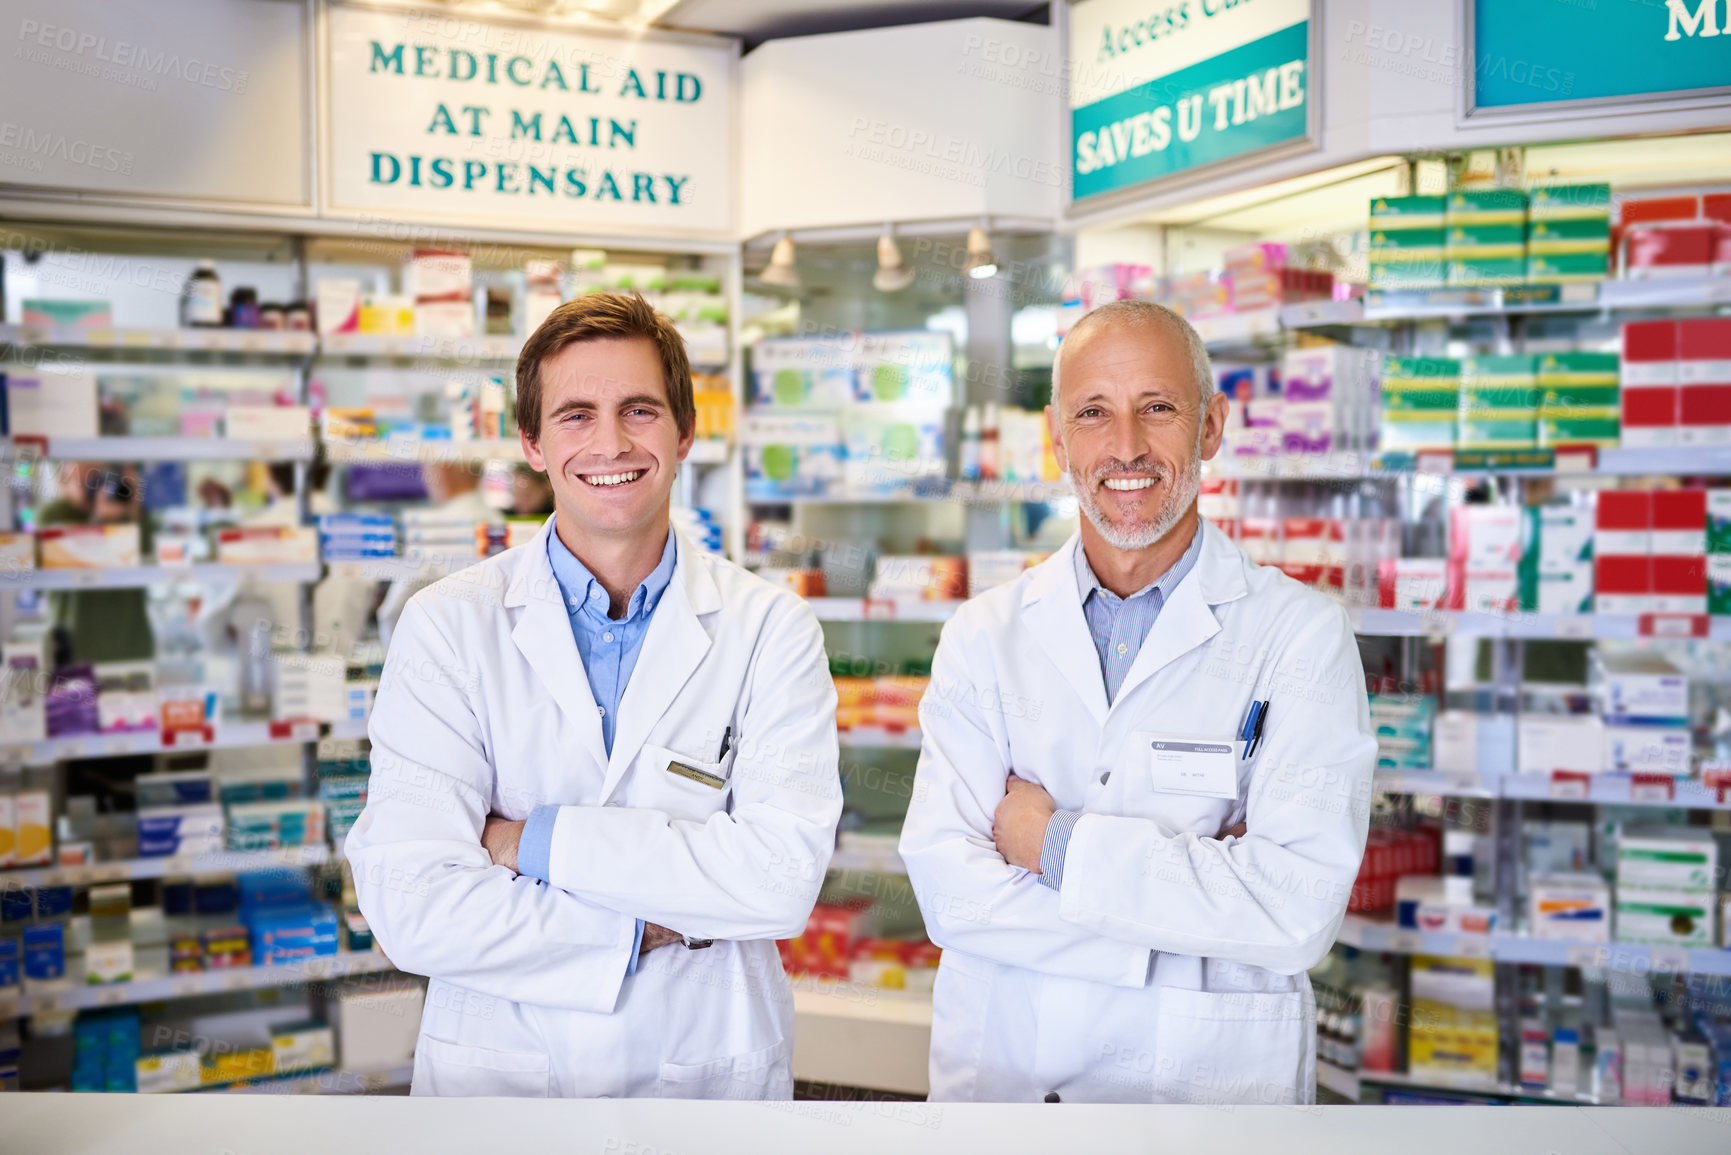 Buy stock photo Portrait of two male pharmacists working in a chemist